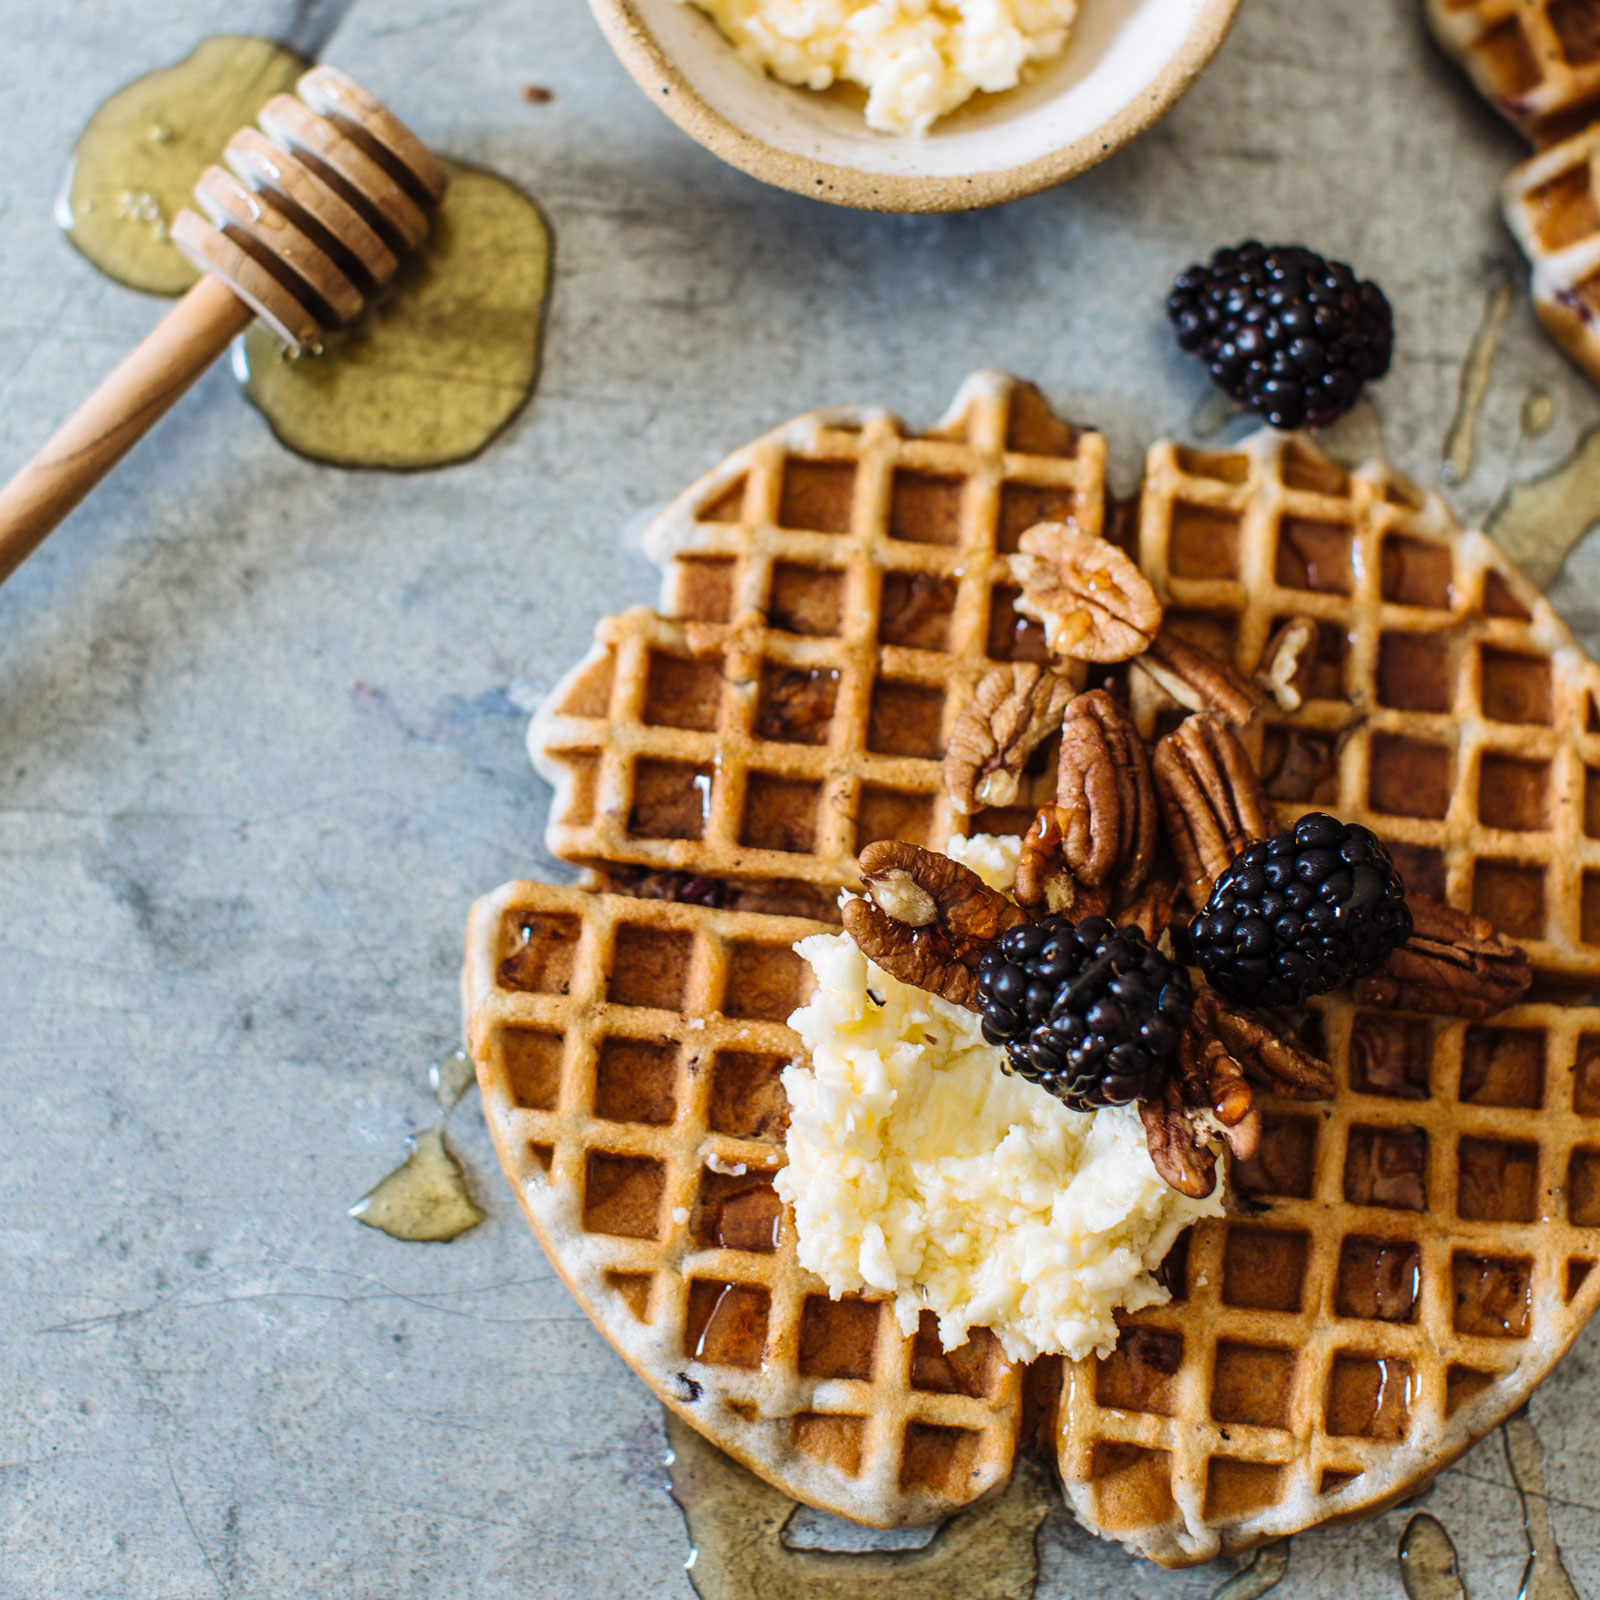 Blackberry & Pecan Belgian Waffles with Whipped Honey Butter